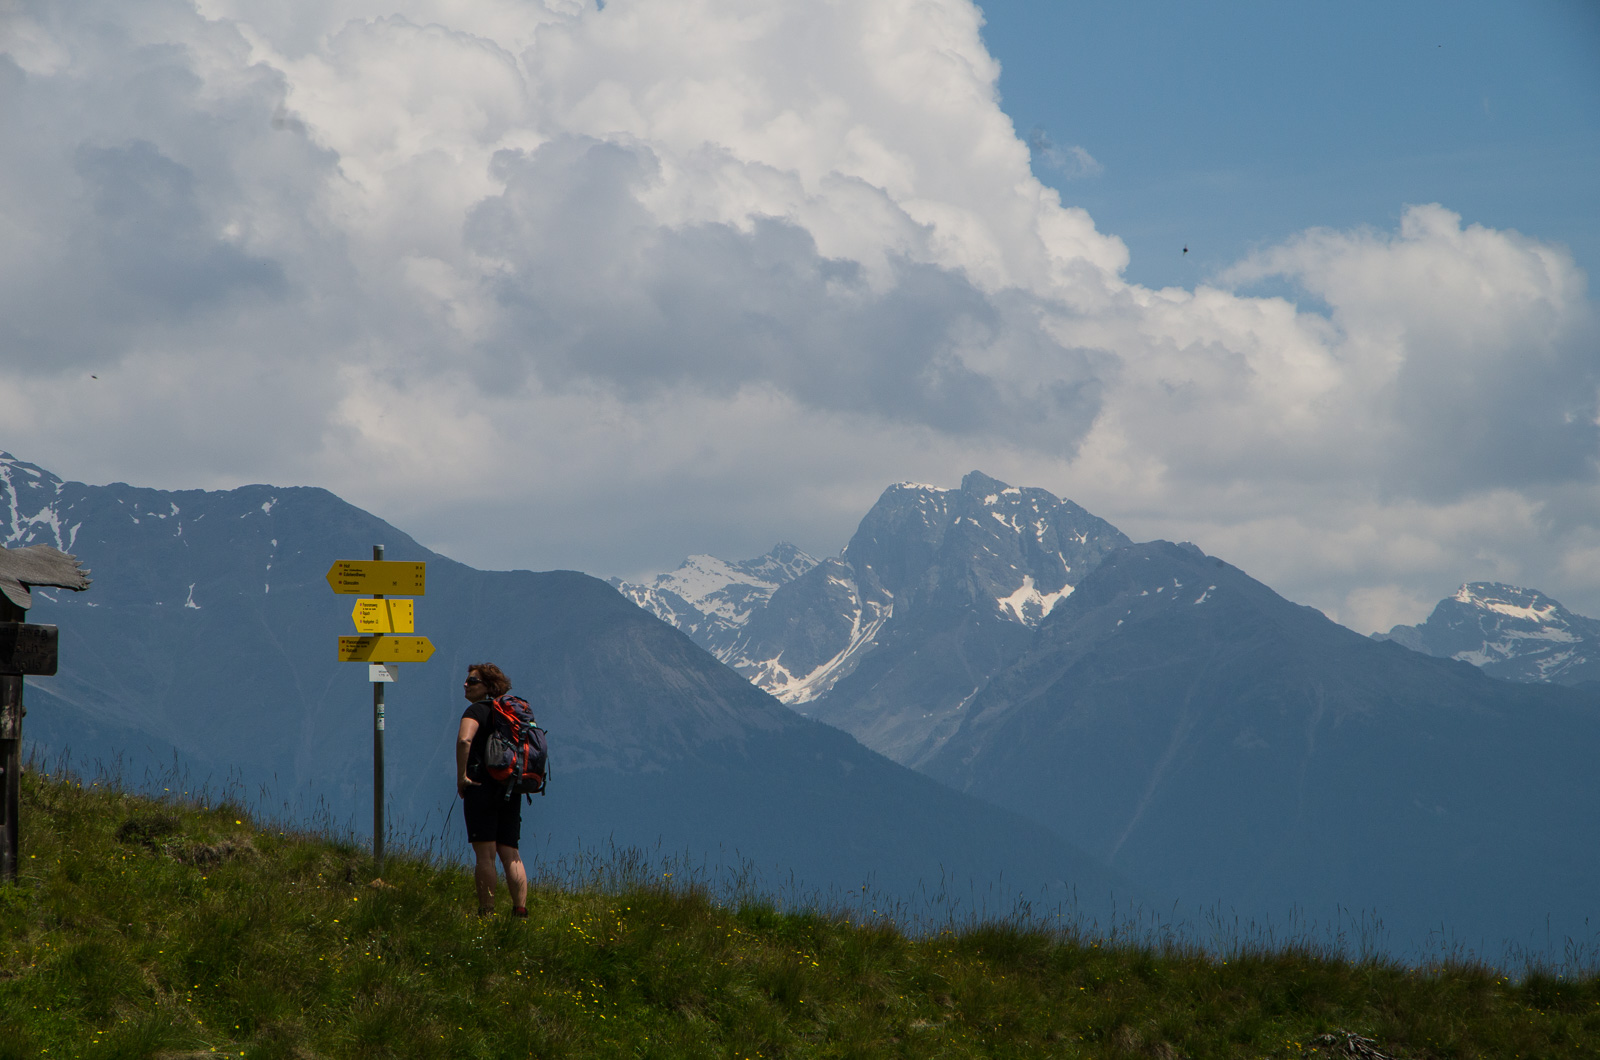 A woman reading a sign post, snow-capped mountains in the background